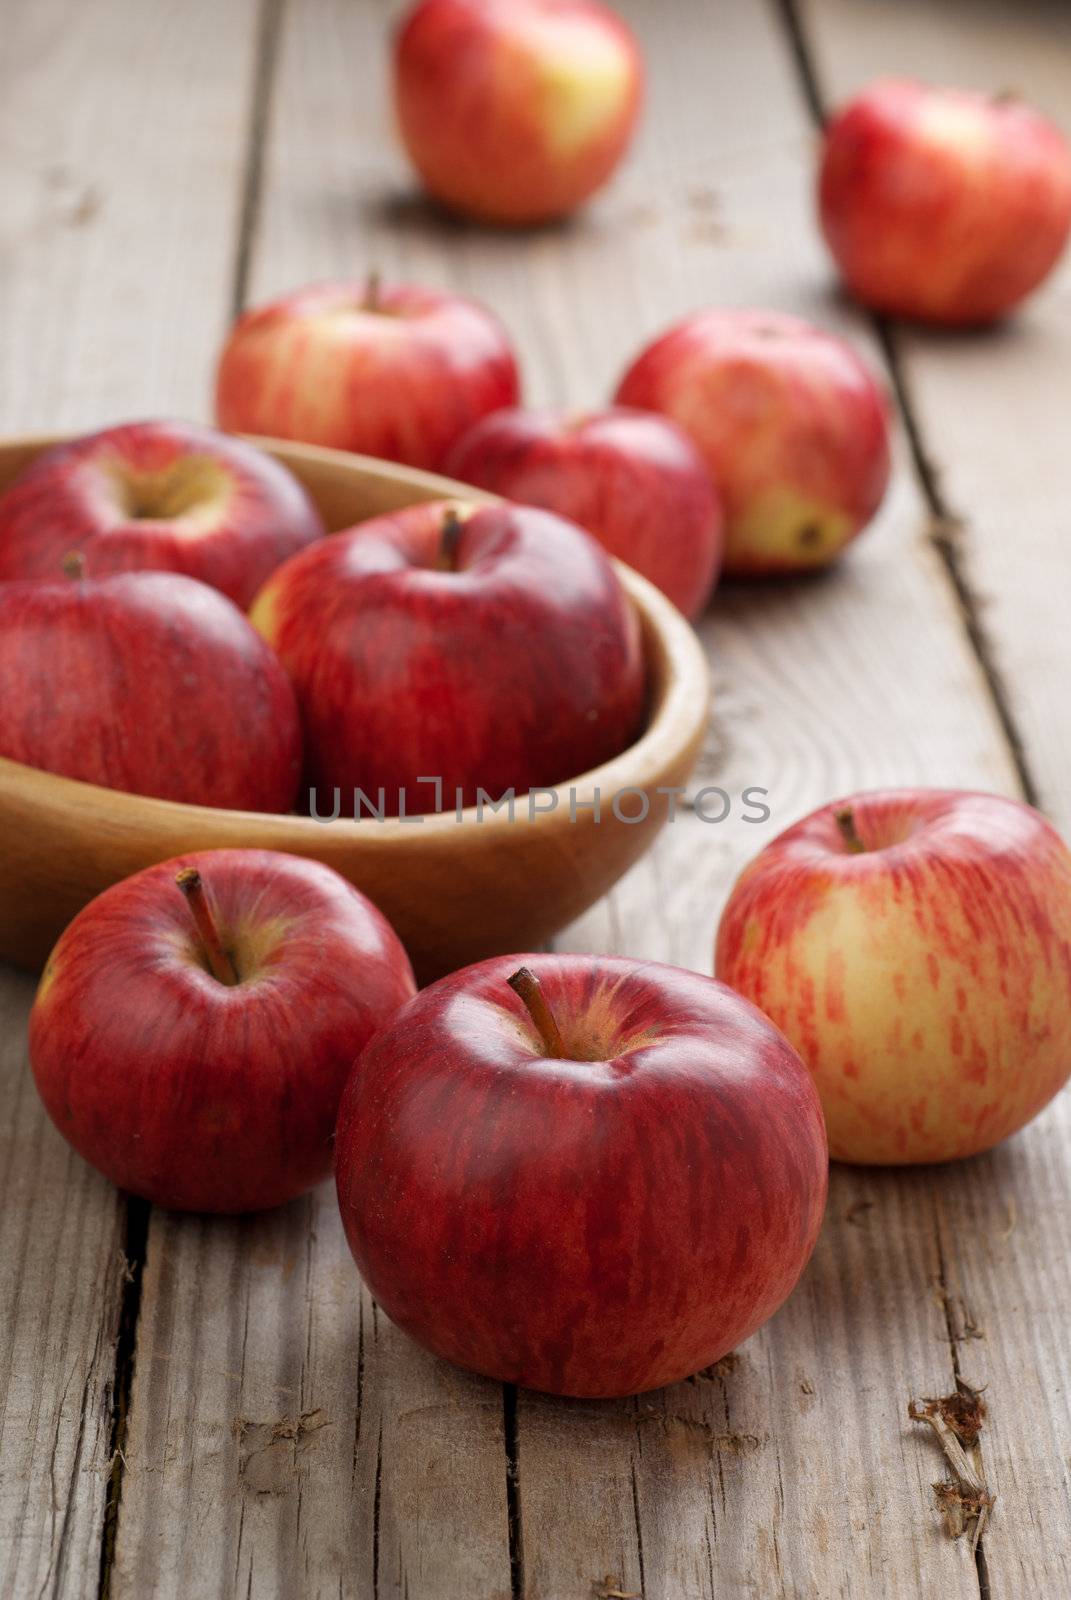 A bowl of red apples on the wooden table